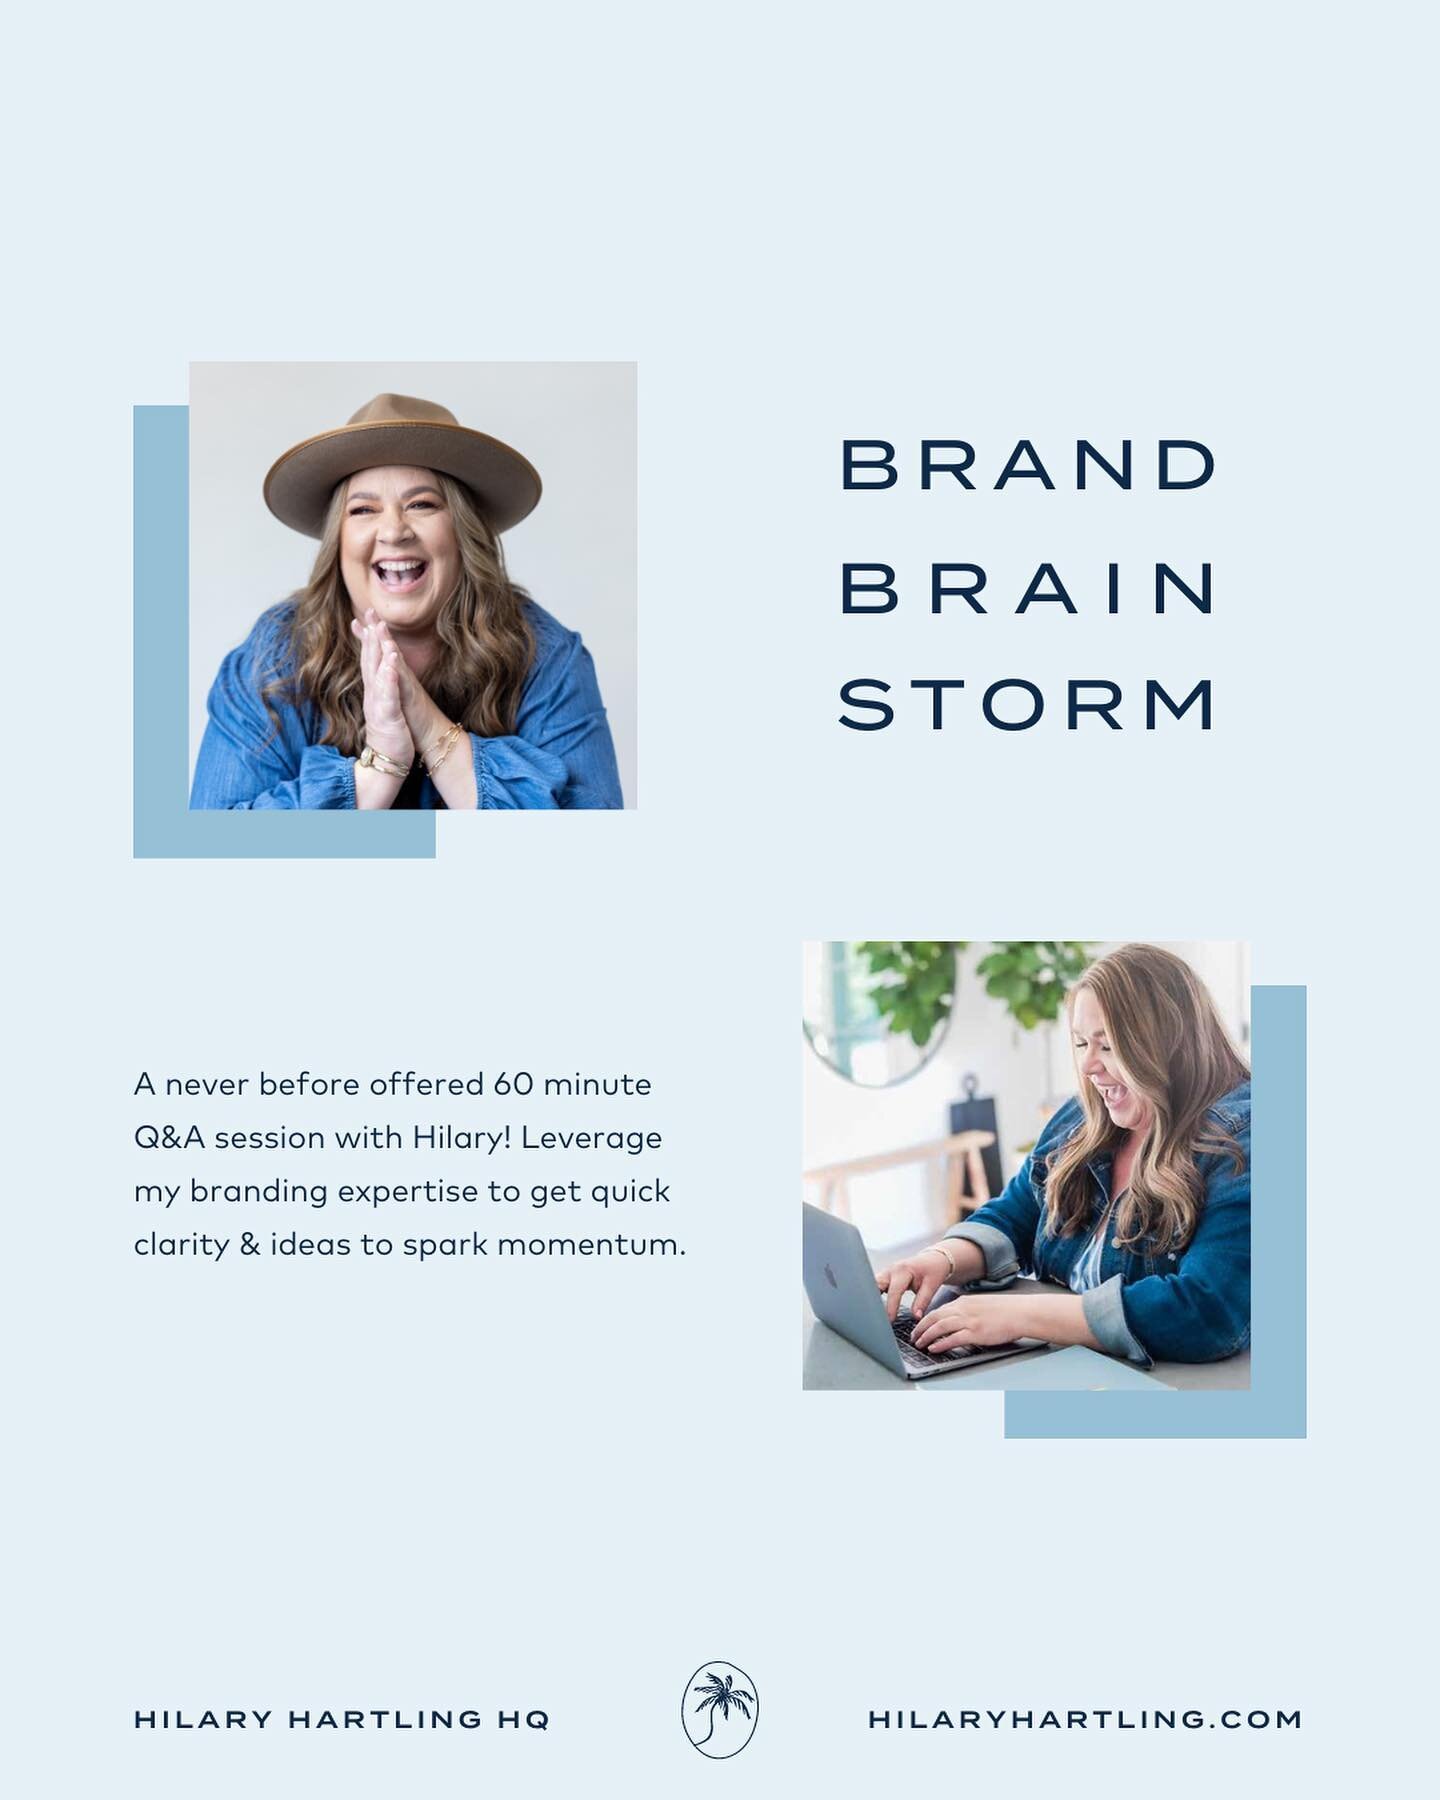 Want to brainstorm with me about your brand?  Here&rsquo;s your chance&hellip;

Fun story - Recently, I had a Brand Consult Call with a potential client for my 1:1 high ticket service (DFY Brand Strategy Development).

We had so much fun talking abou